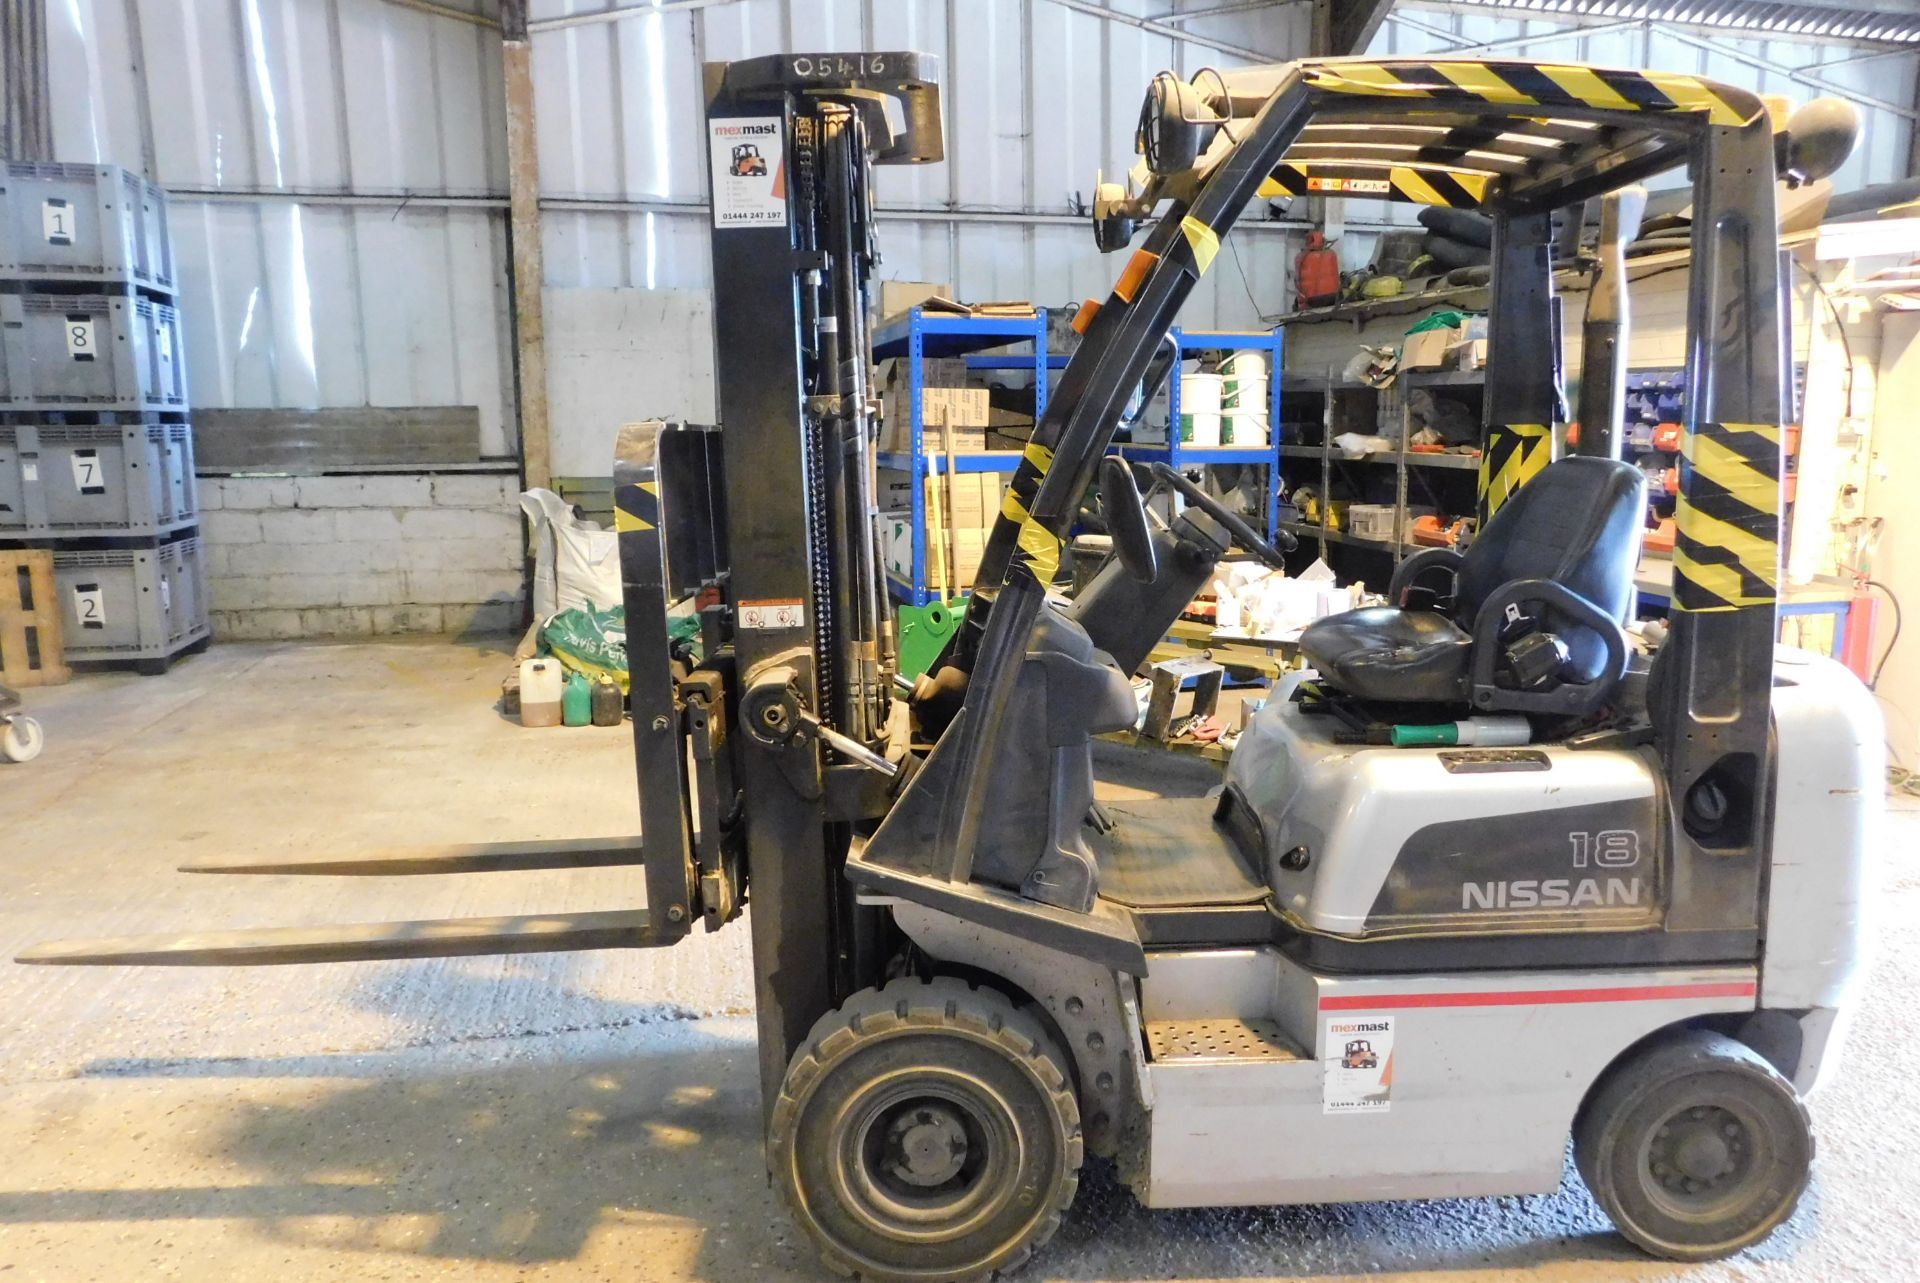 Nissan Type Y1D1A18Q Diesel Fork Lift Truck (2008), Serial Number Y1D1E700/131 with Sideshift, Rated - Image 2 of 12